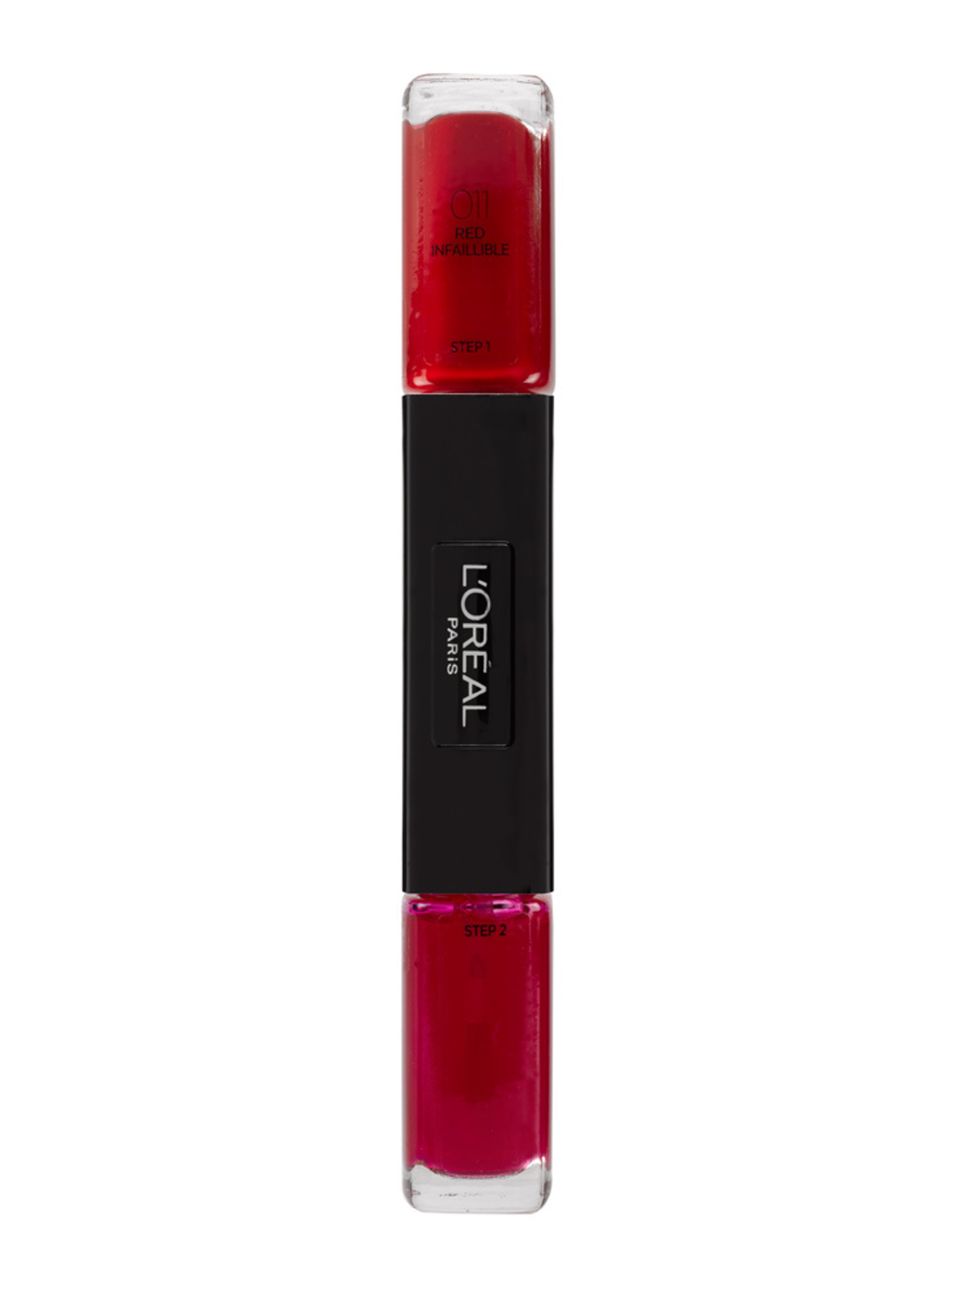 <p><a href="http://www.boots.com/en/LOreal-Paris-Infallible-Nail-Polish_1505242/">L'Oreal Paris in Red Infallible, £7.99</a></p>